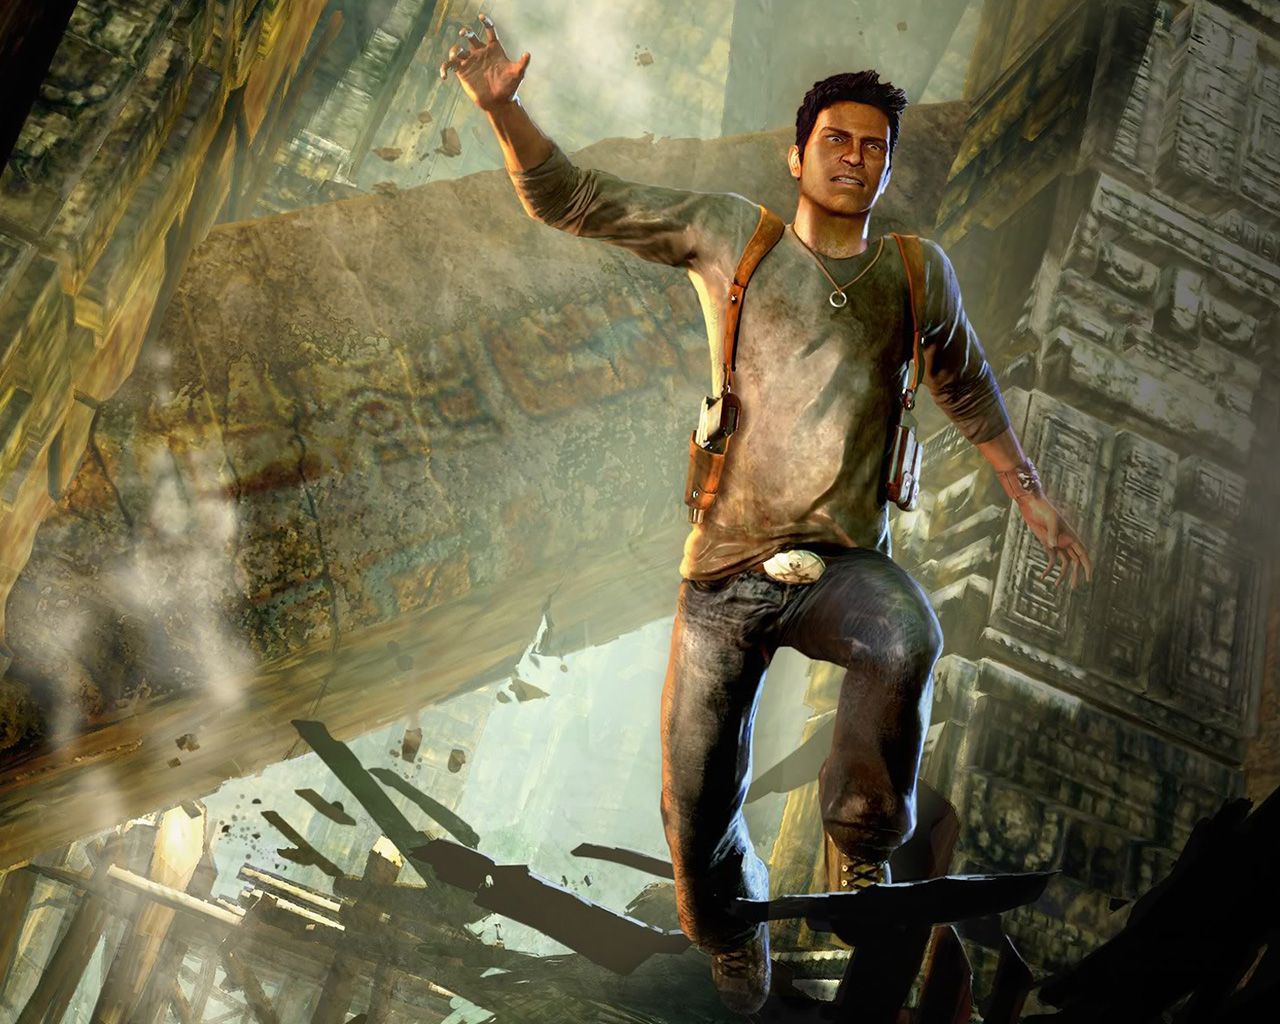 Free Uncharted: Drake's Fortune Wallpaper in 1280x1024. Uncharted, Multimedia artist, Wallpaper